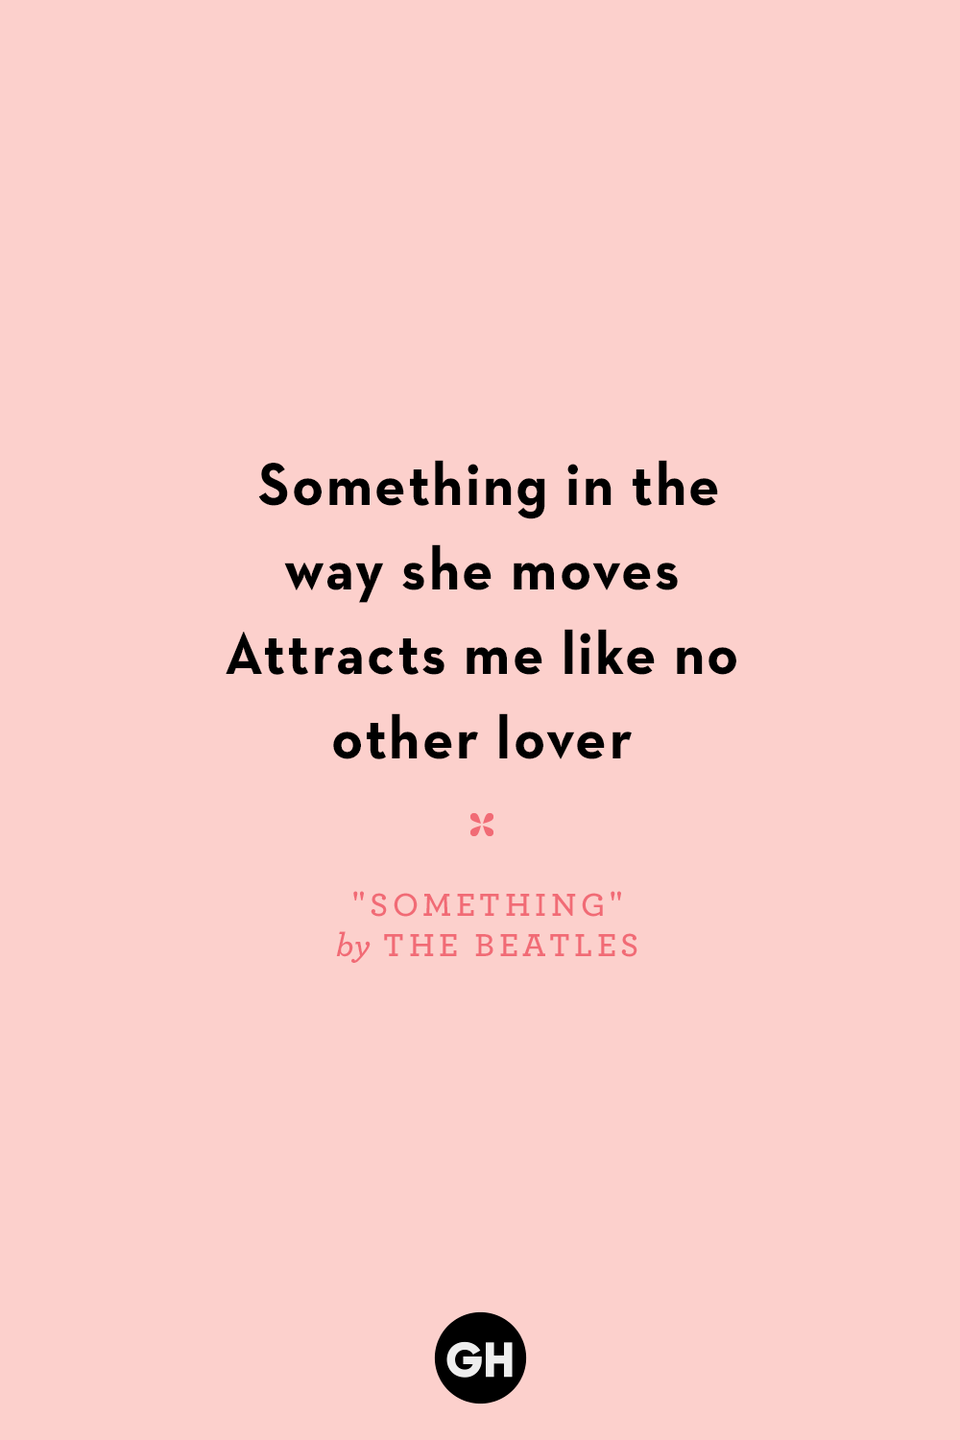 "Something" by The Beatles